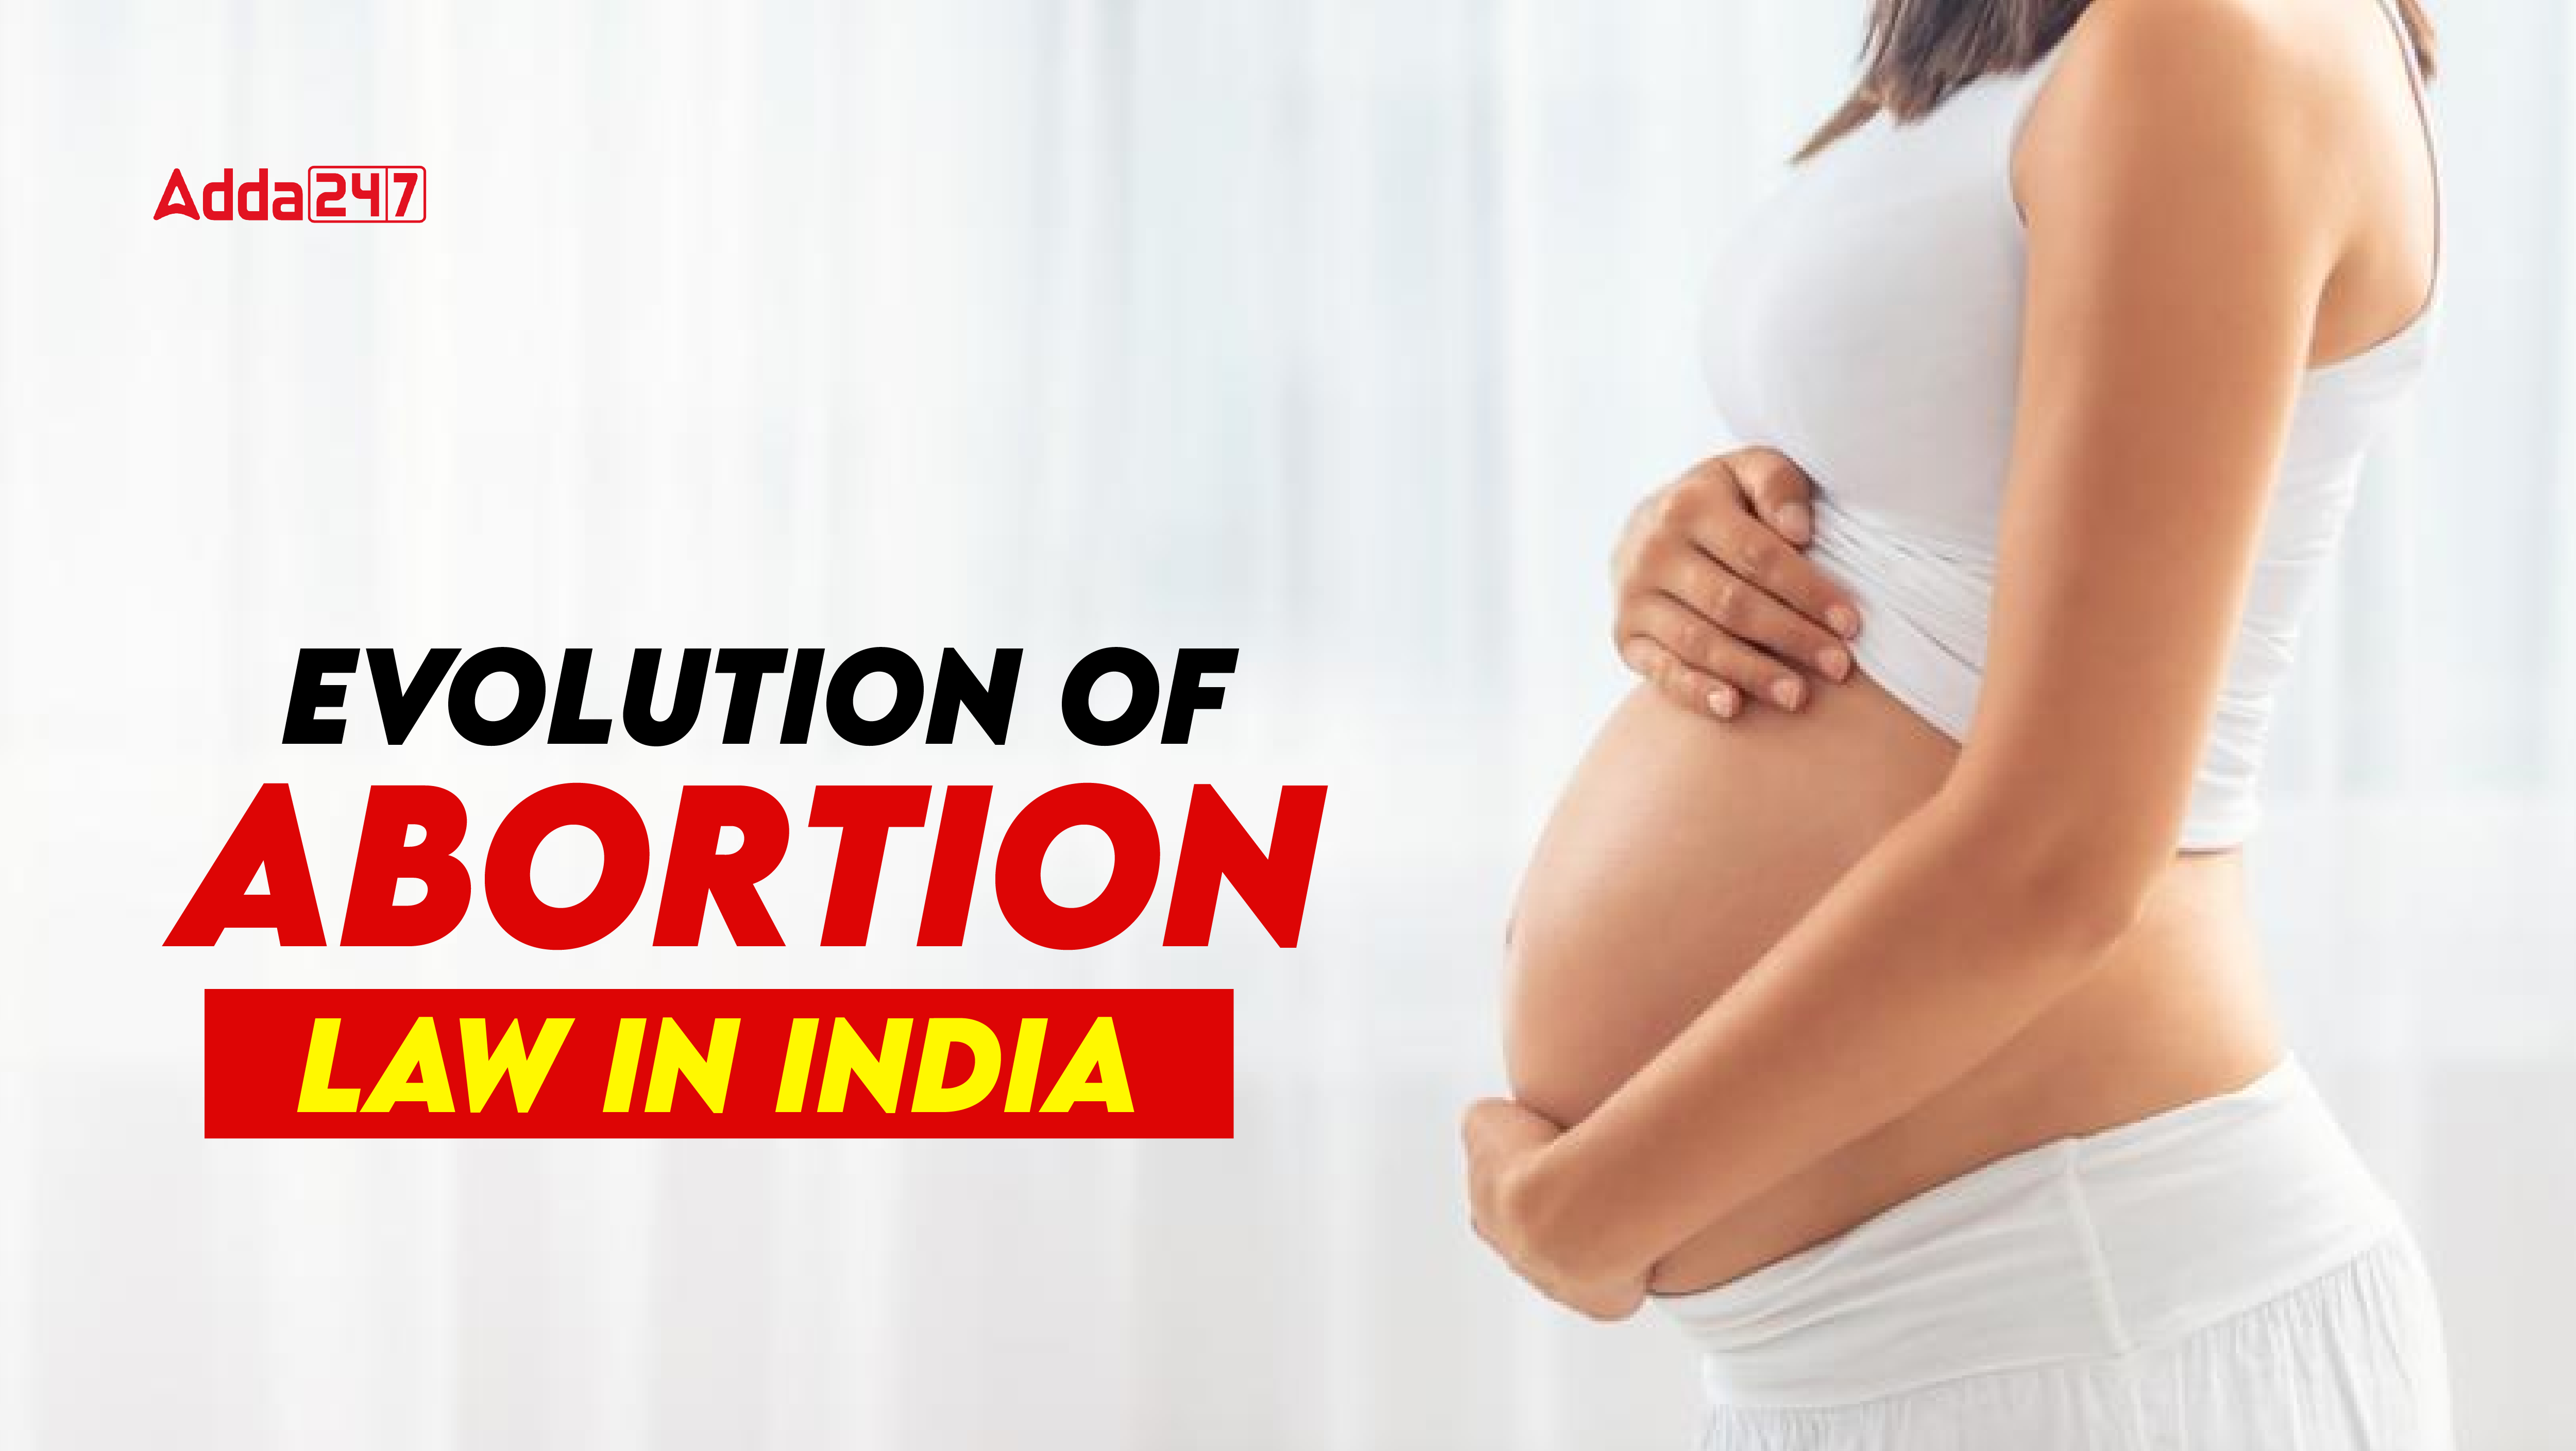 Evolution of Abortion Law in India